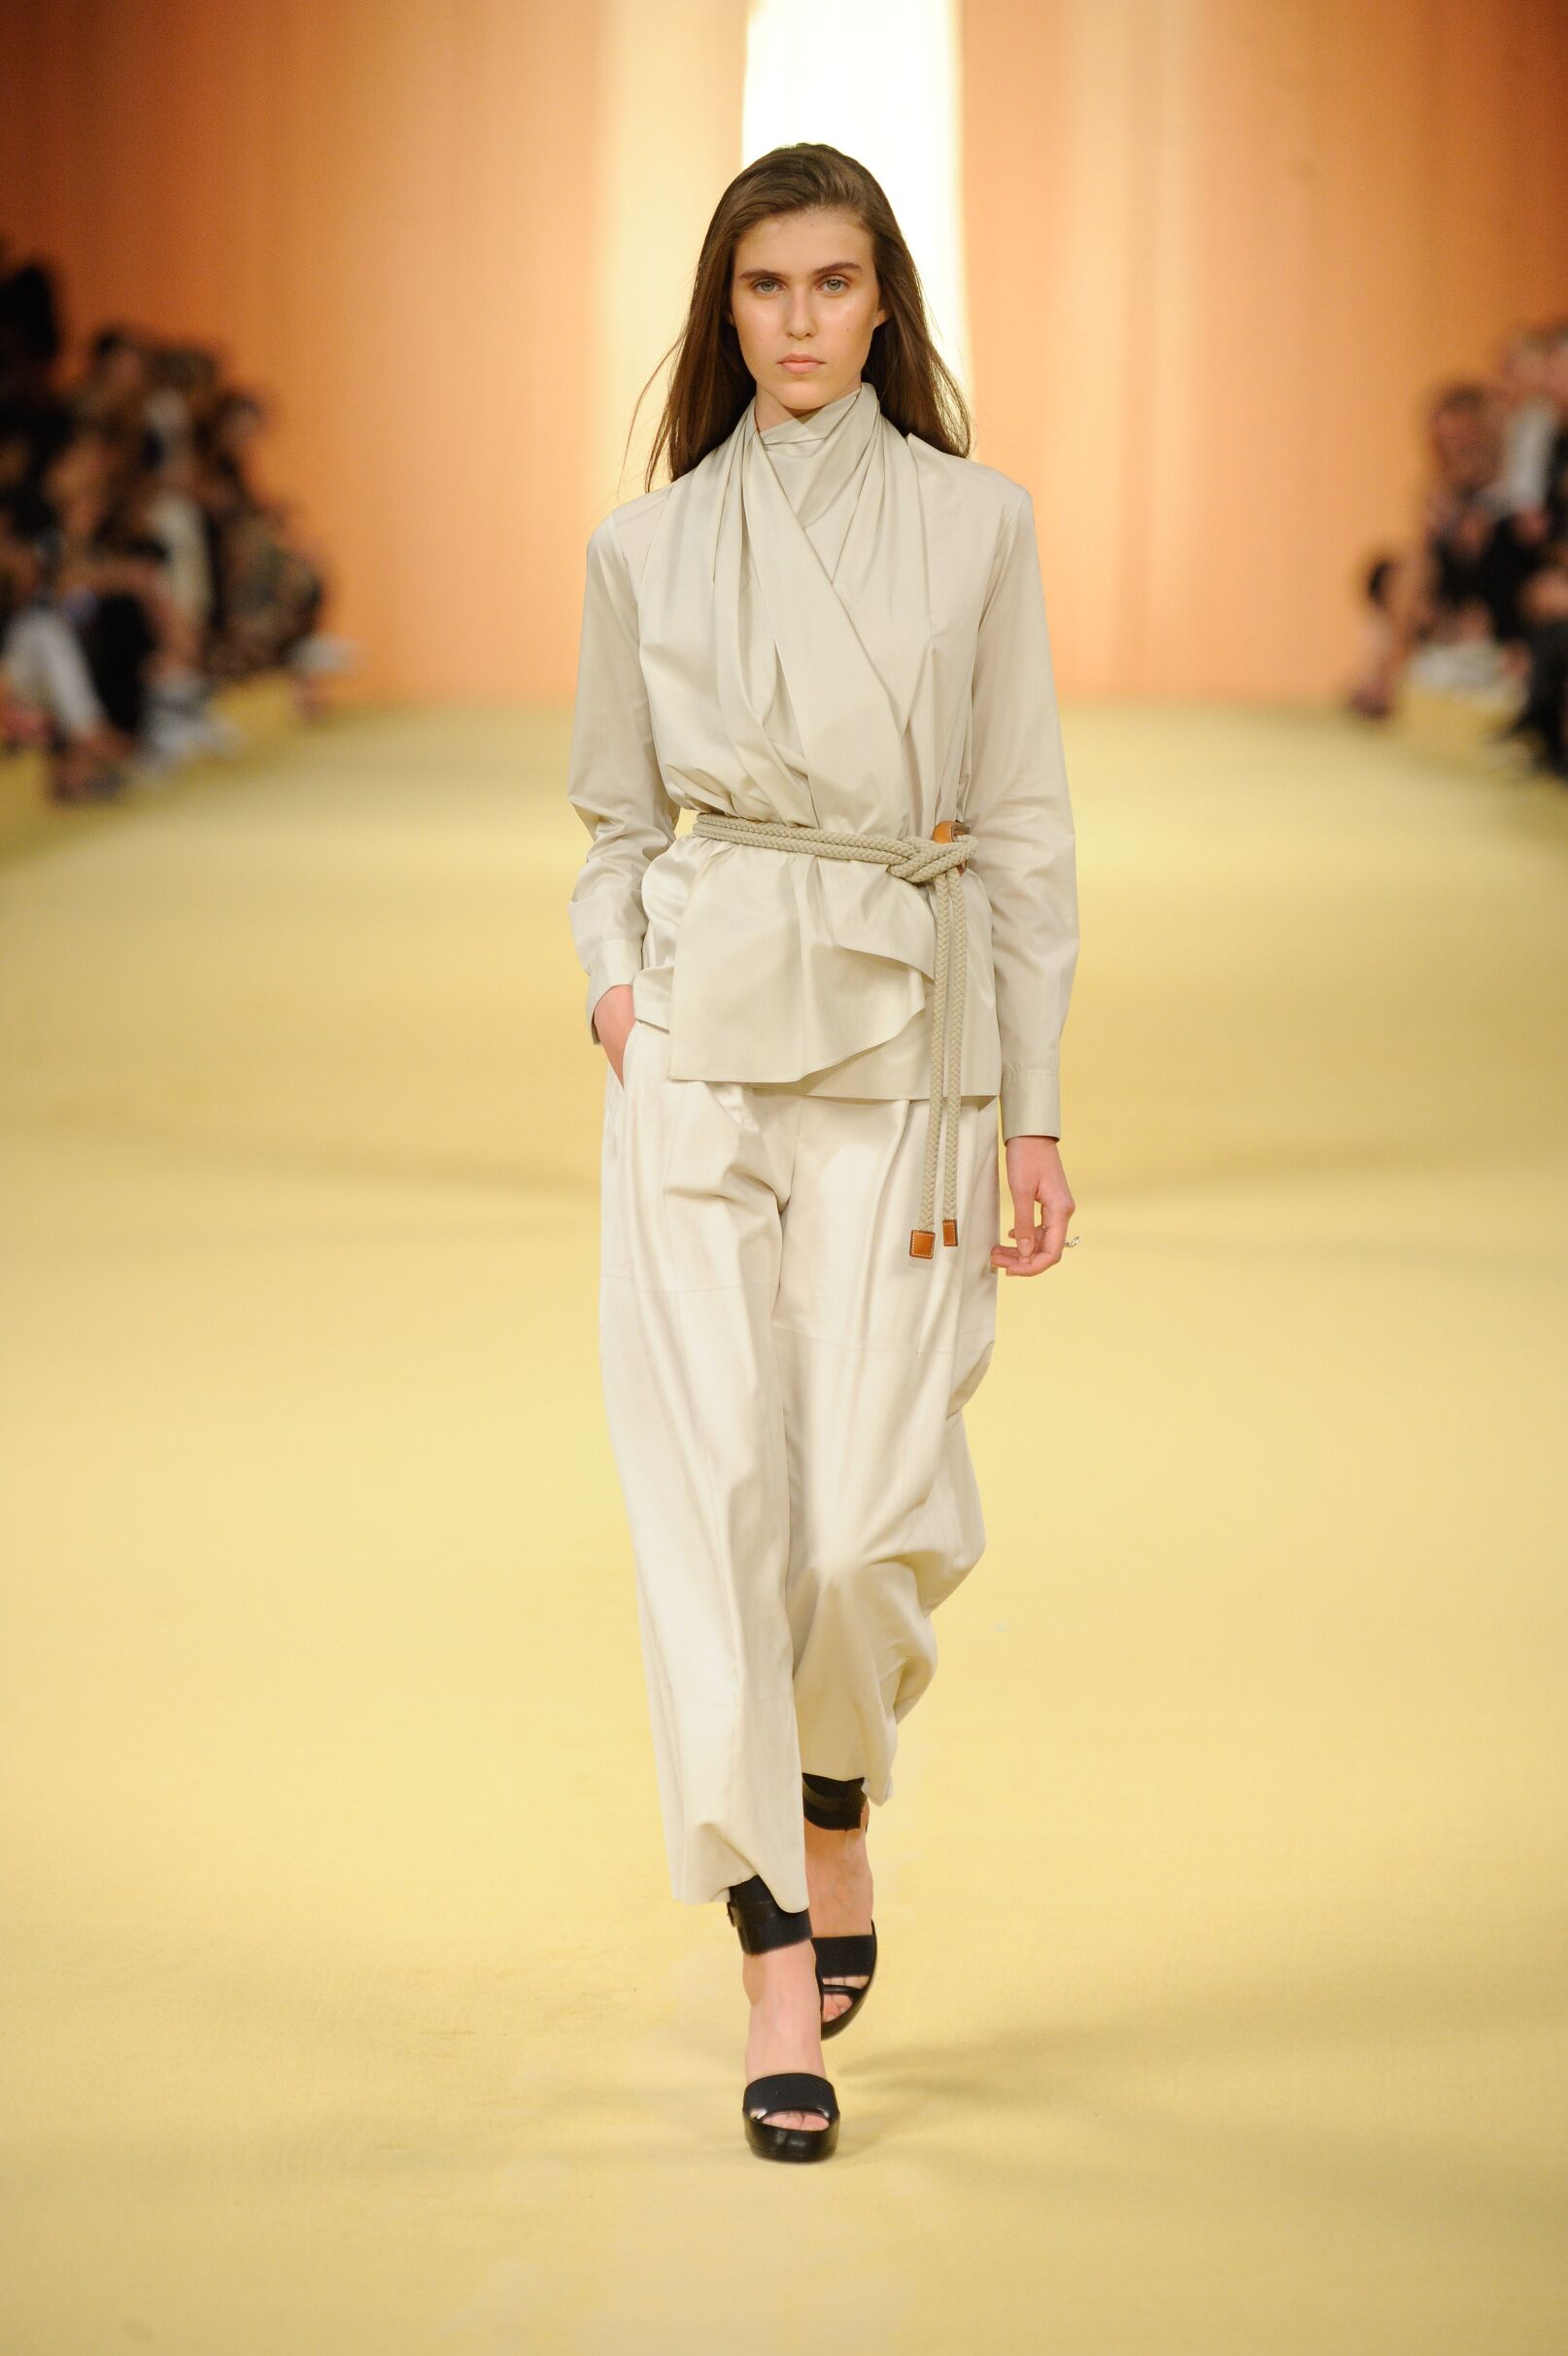 HERMÈS SPRING SUMMER 2015 WOMEN'S COLLECTION | The Skinny Beep